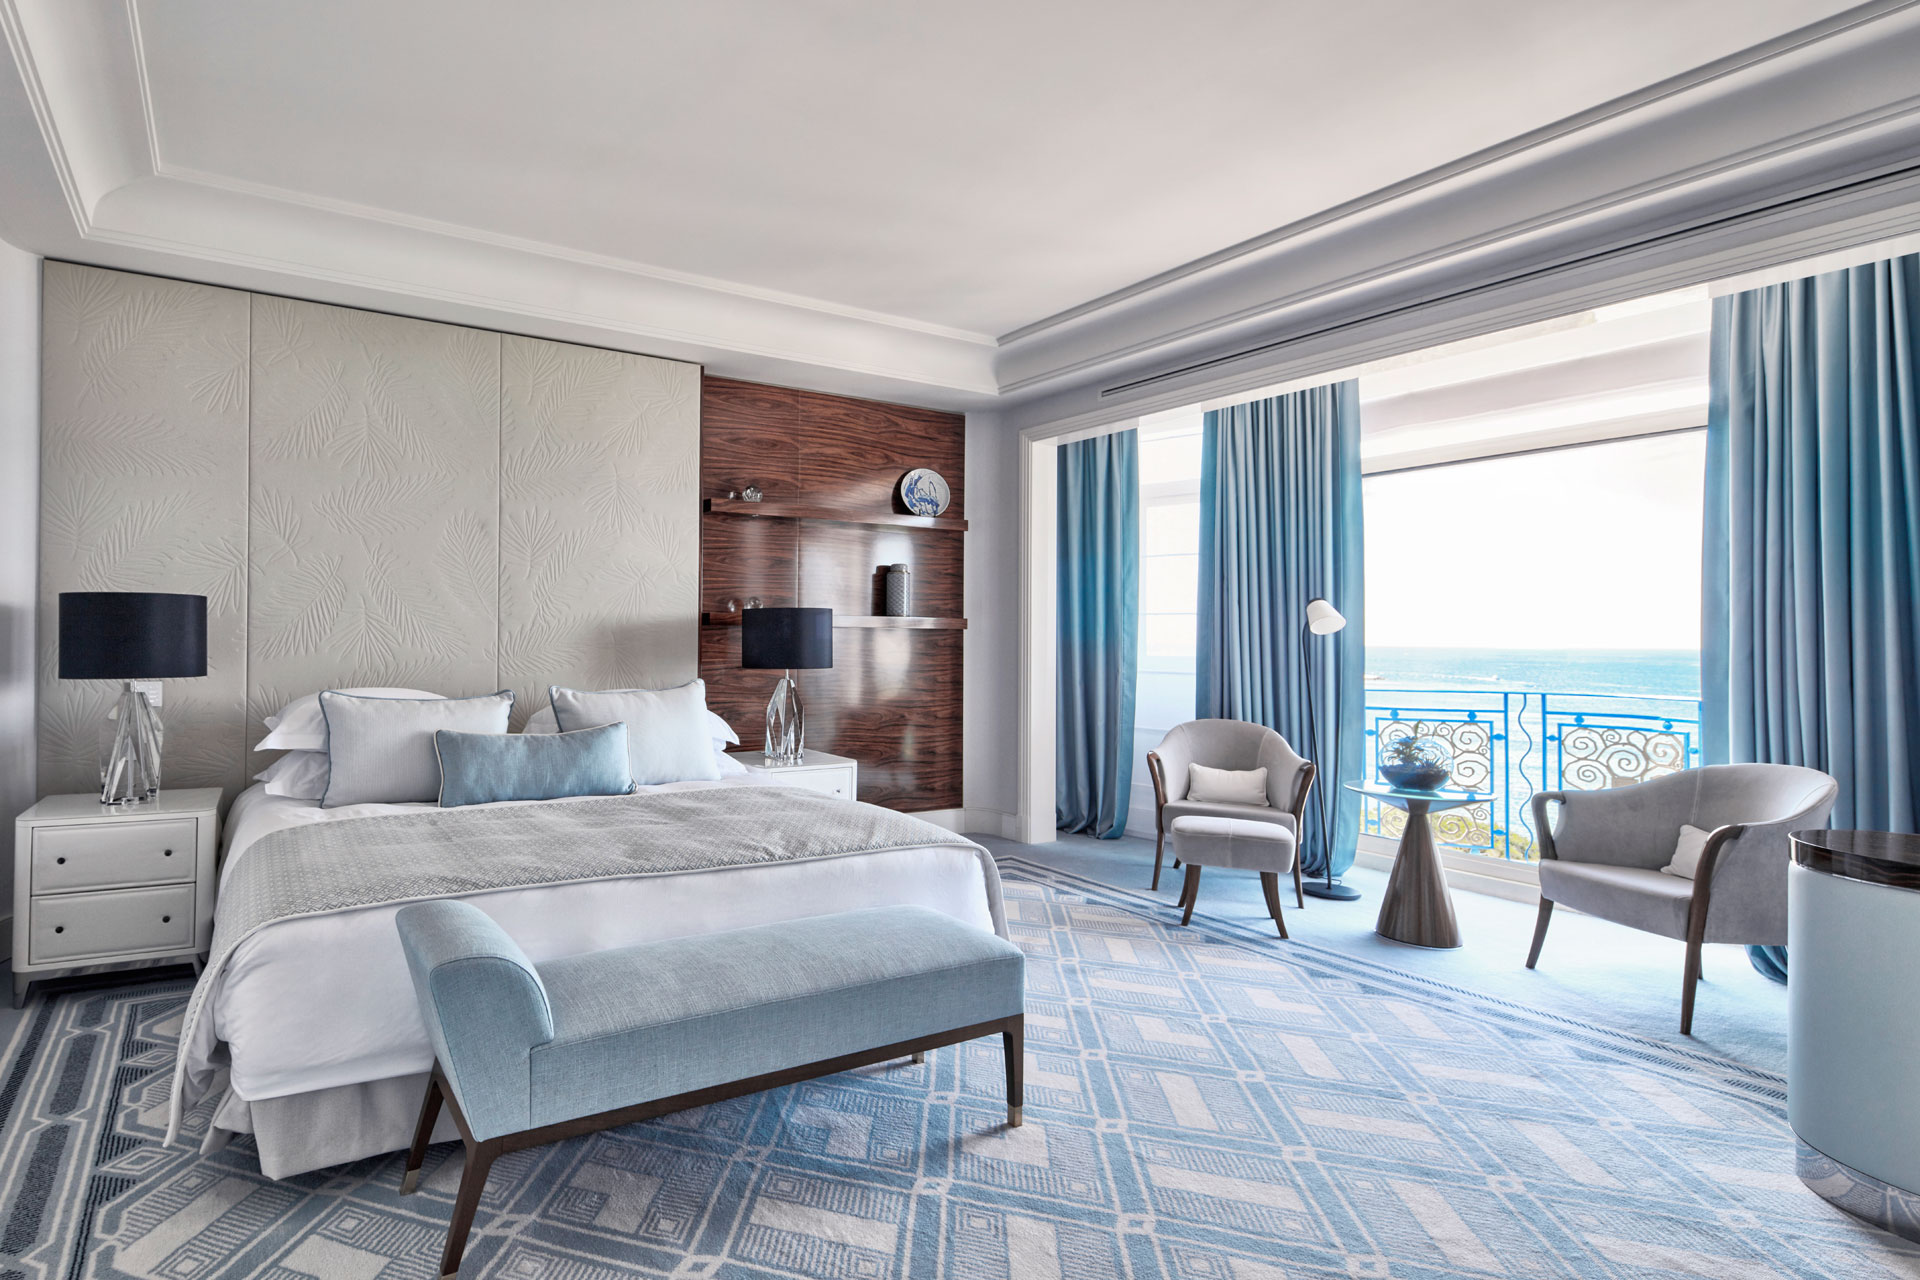 Penthouse bedroom at Hotel Martinez, featuring pale blue carpets and curtains, a blue velvet chaise longue, and white furniture.